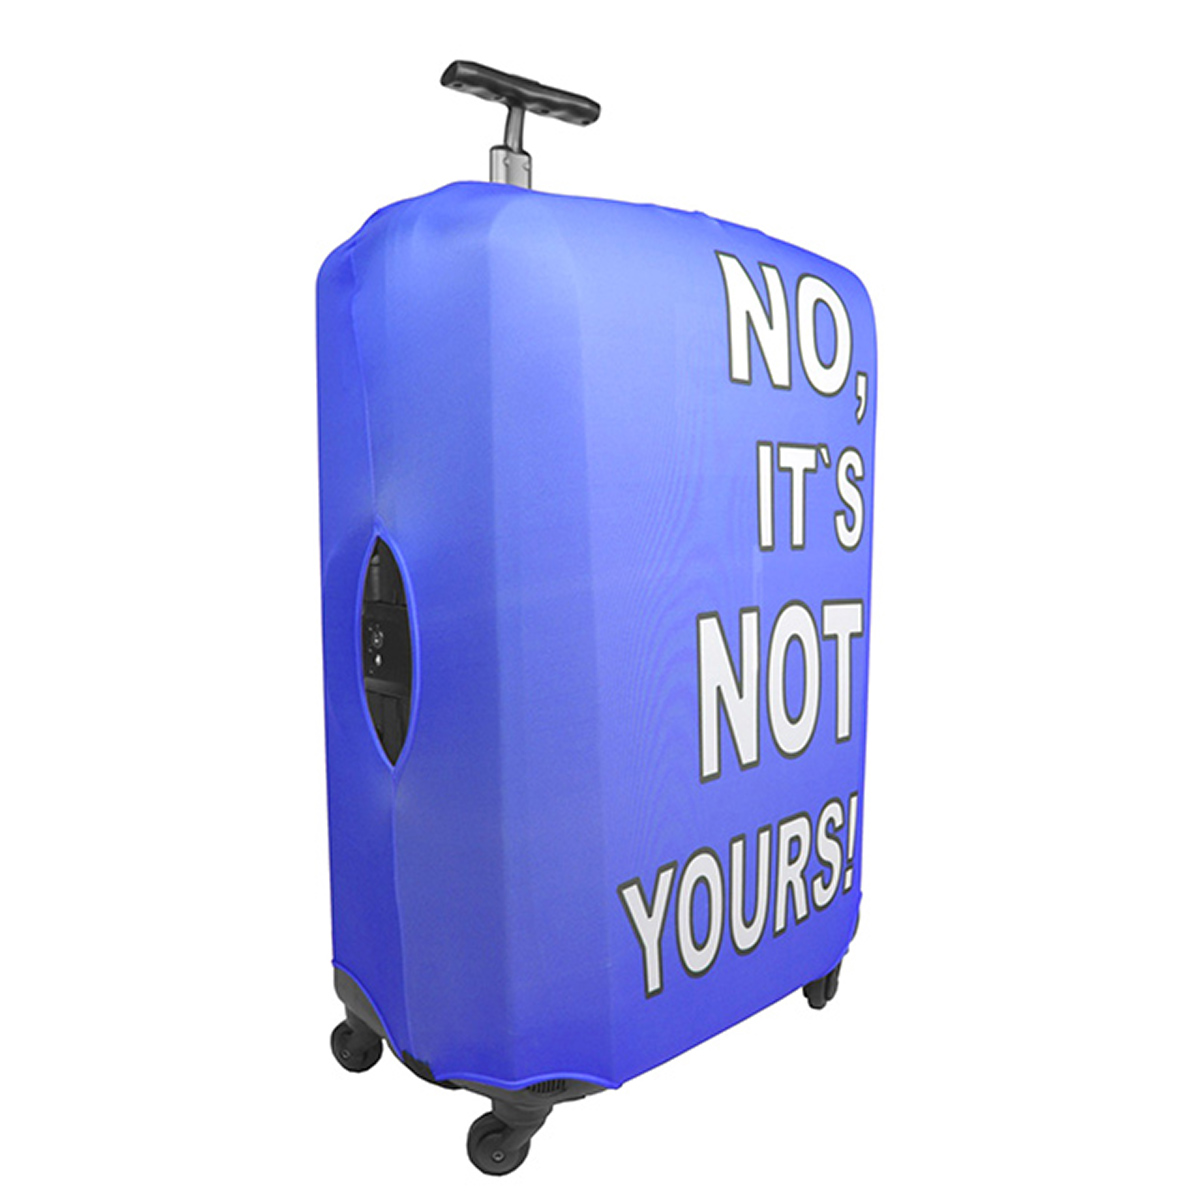 Luggage Cover - Assorted Colors